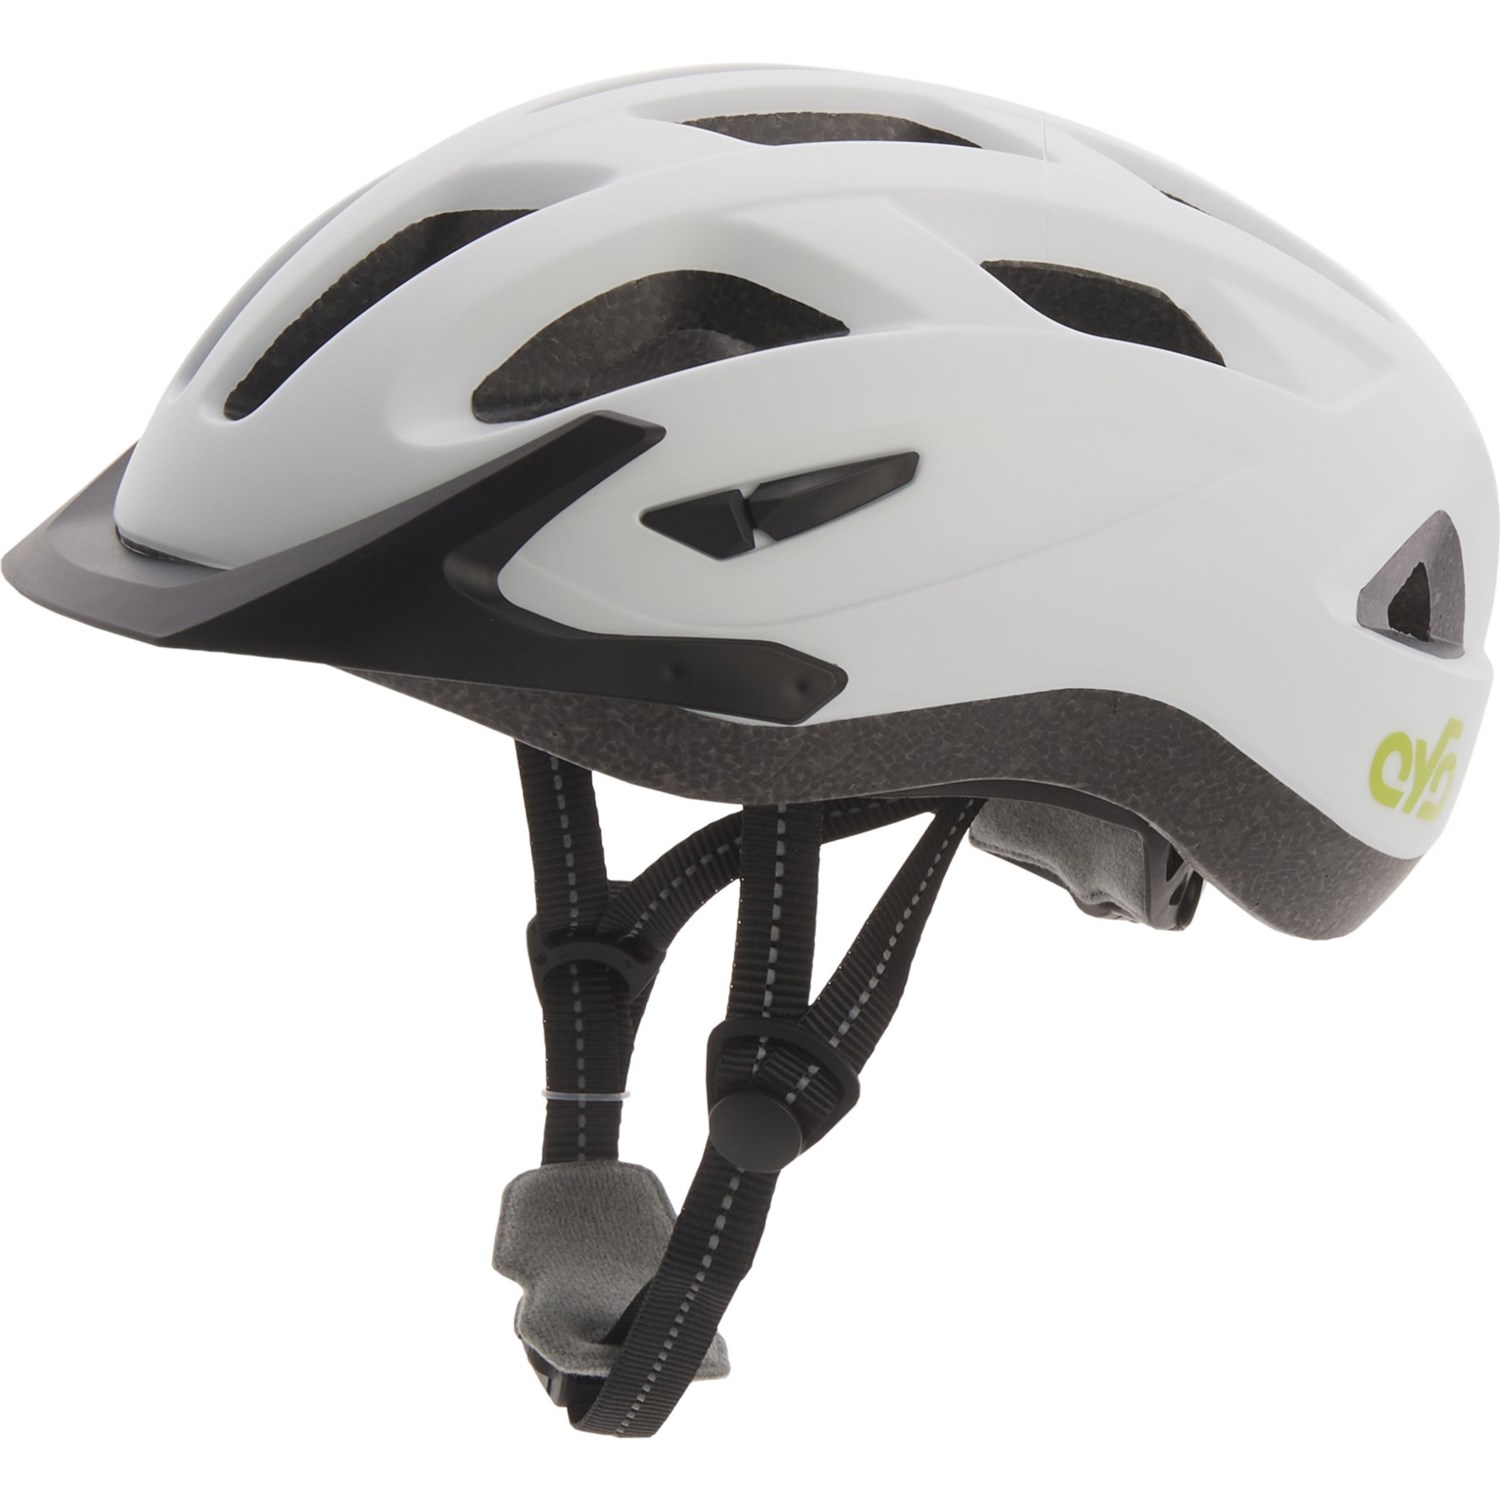 CYCLIC Hybrid Bike Helmet with LED (For Men and Women)